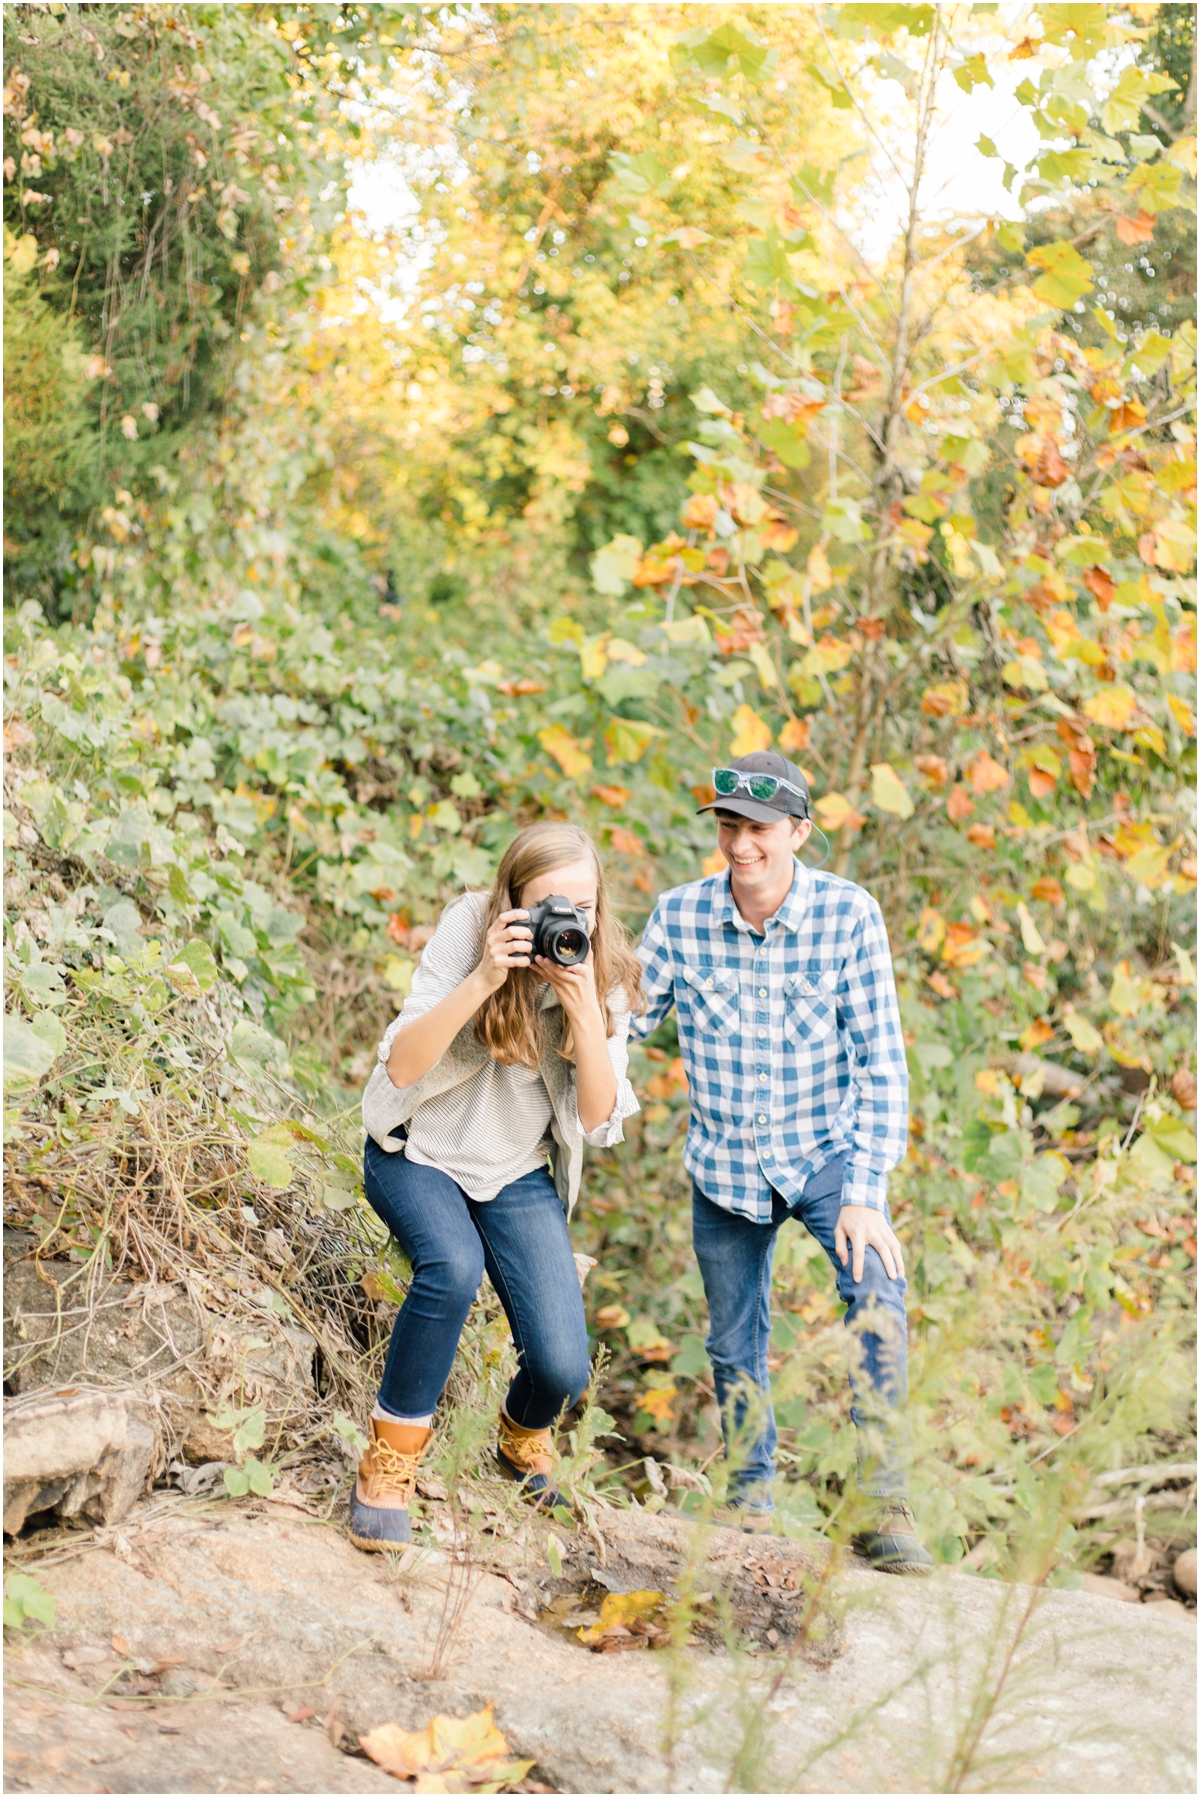 Behind the Scenes 2019 l Greenville, SC Wedding Photographer l Sprinkle Photography